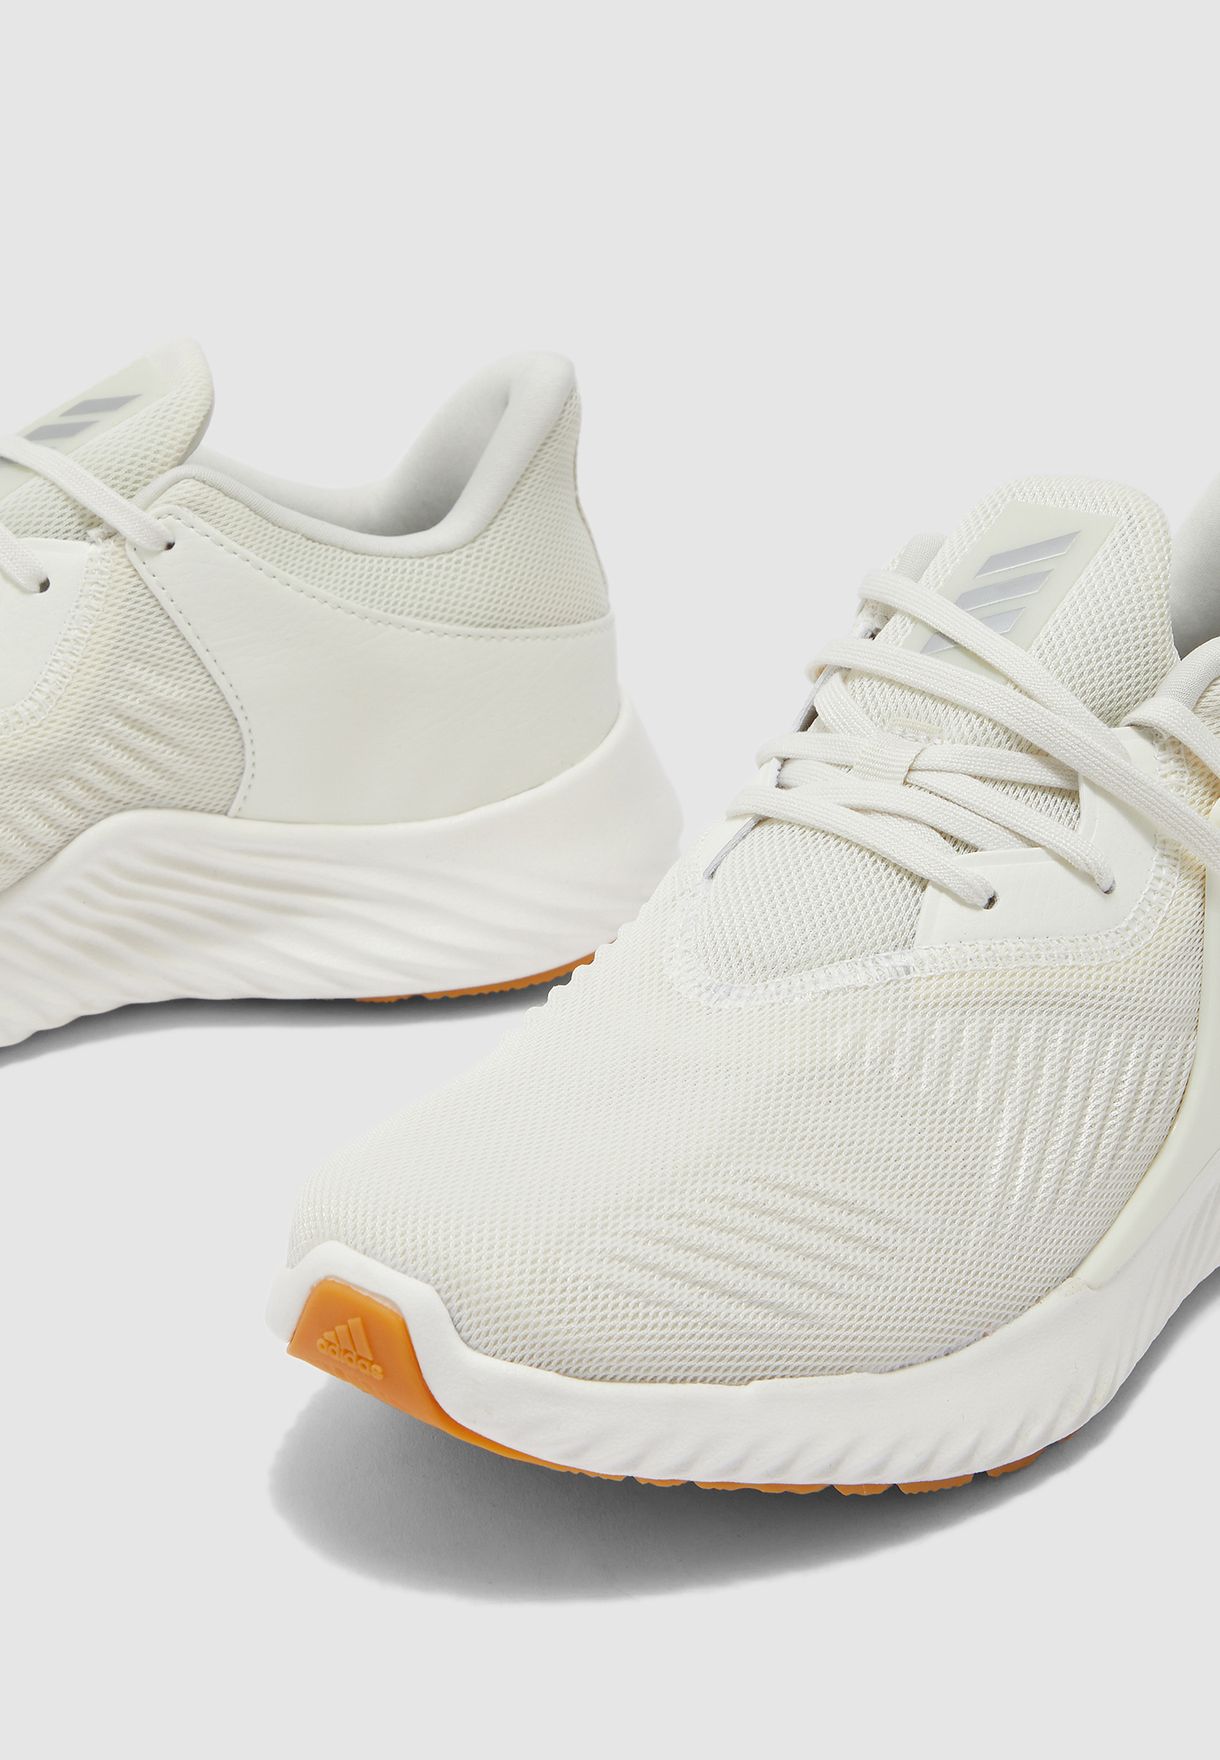 alphabounce rc 2.0 shoes white